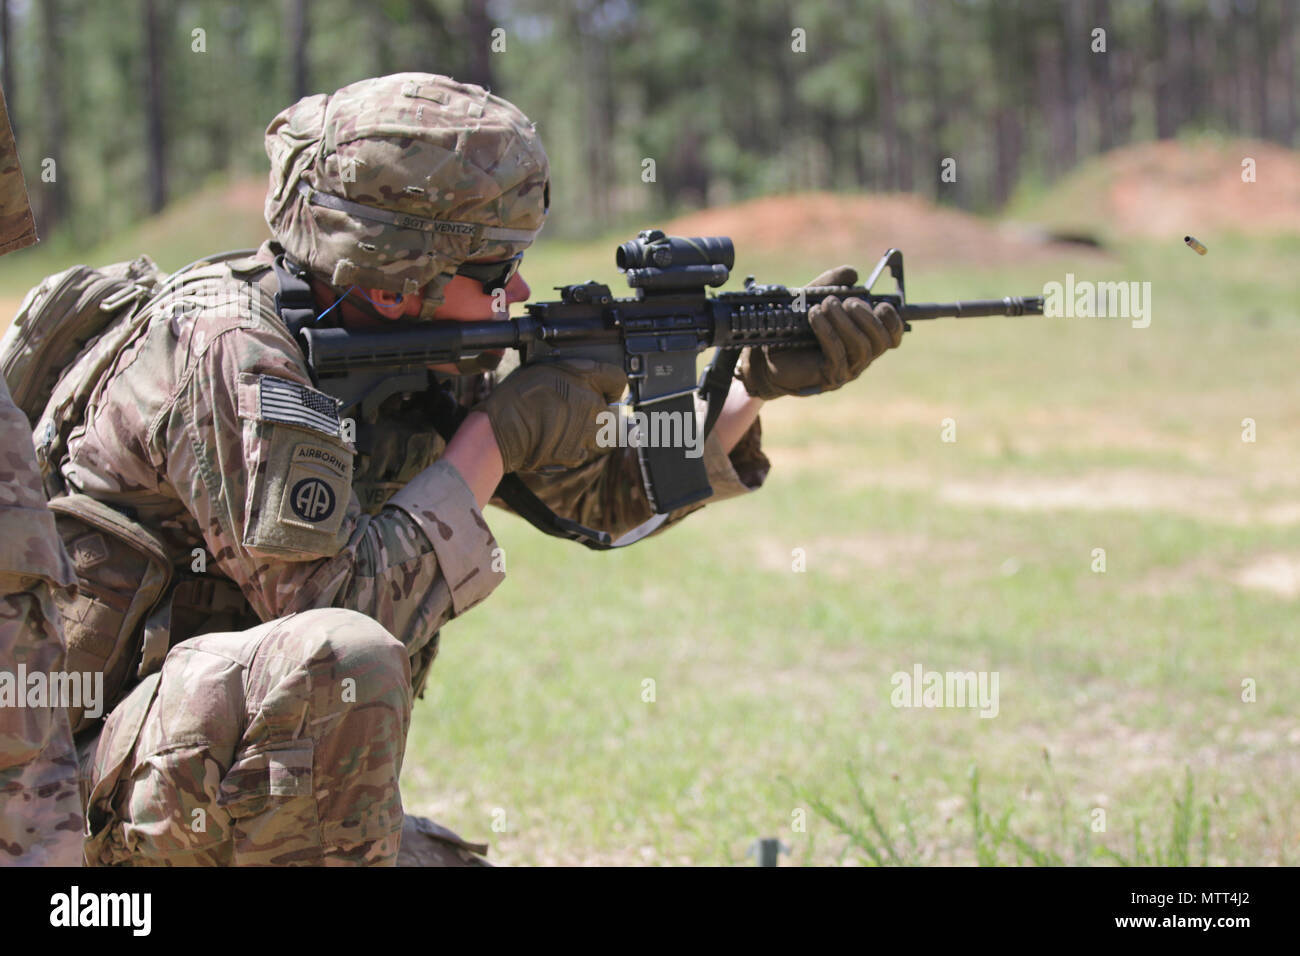 A U.S. Army paratrooper assigned to the 82nd Airborne Division fires an M4 Carbine during the last day of the Small Arms Competition as part of All American Week XXIX at Fort Bragg, North Carolina, May 23, 2018.  Paratroopers past and present converged on the center of the military universe to celebrate being members of the “All American” Division and America’s Guard of Honor. (U.S. Army photo by Sgt. Michelle U. Blesam) Stock Photo